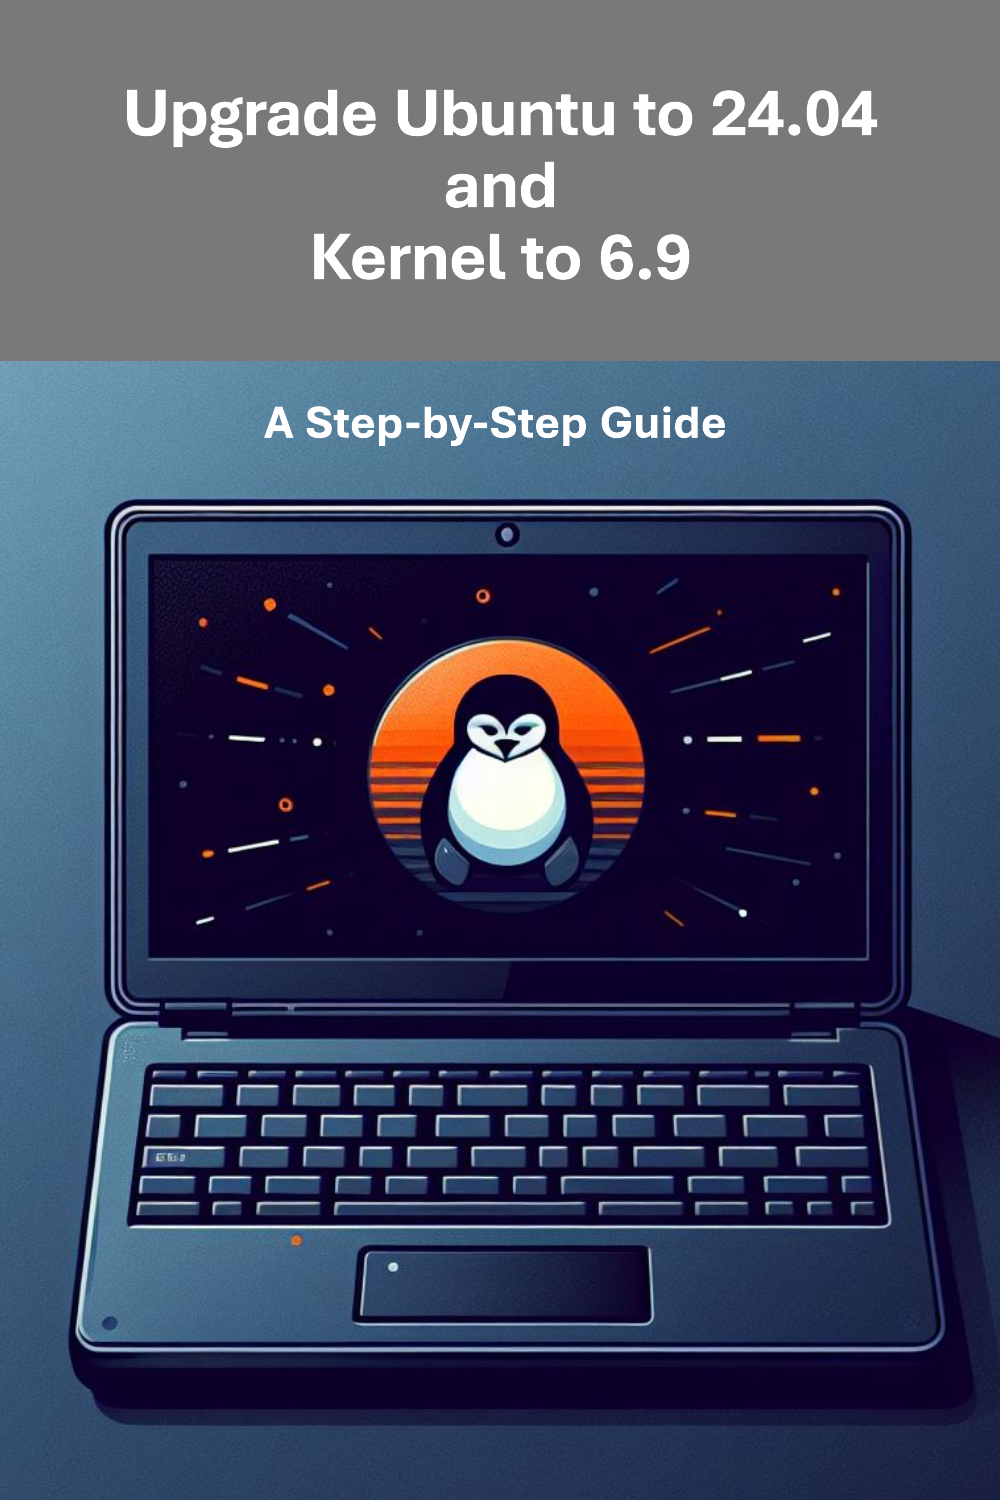 How to upgrade Ubuntu to 24.04 and kernel to latest version